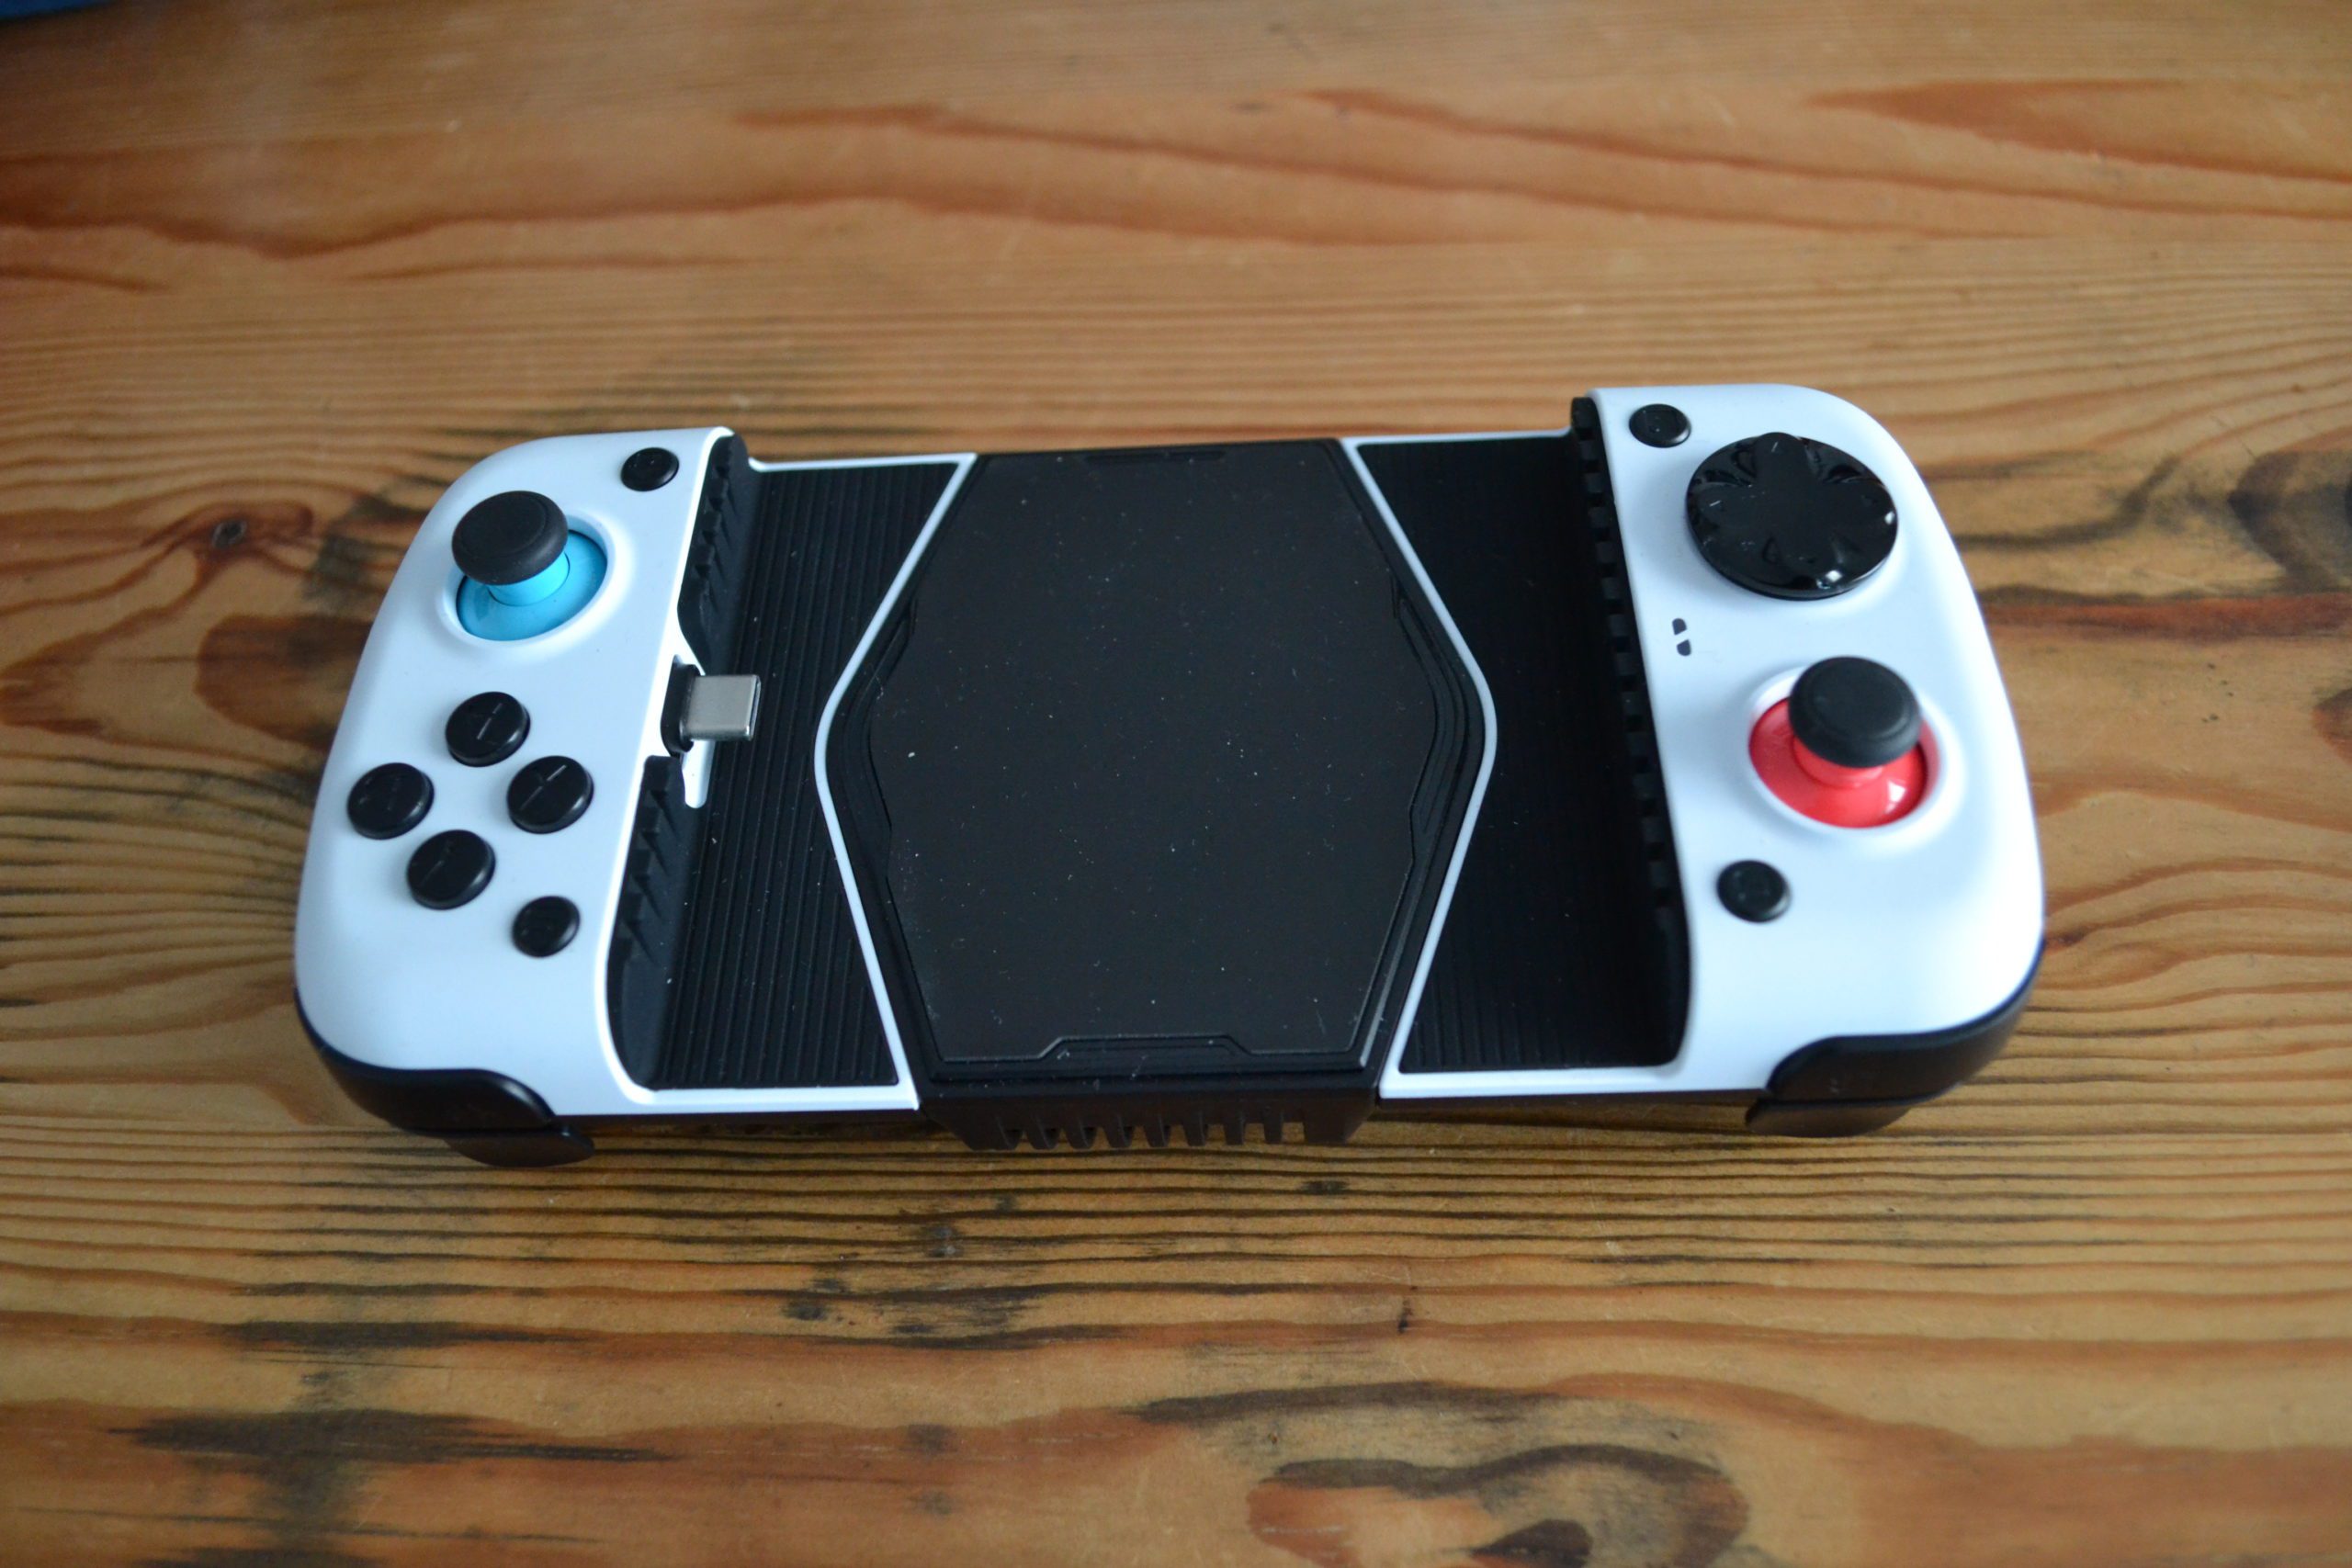  GameSir X3 Type-C Mobile Game Controller for Android